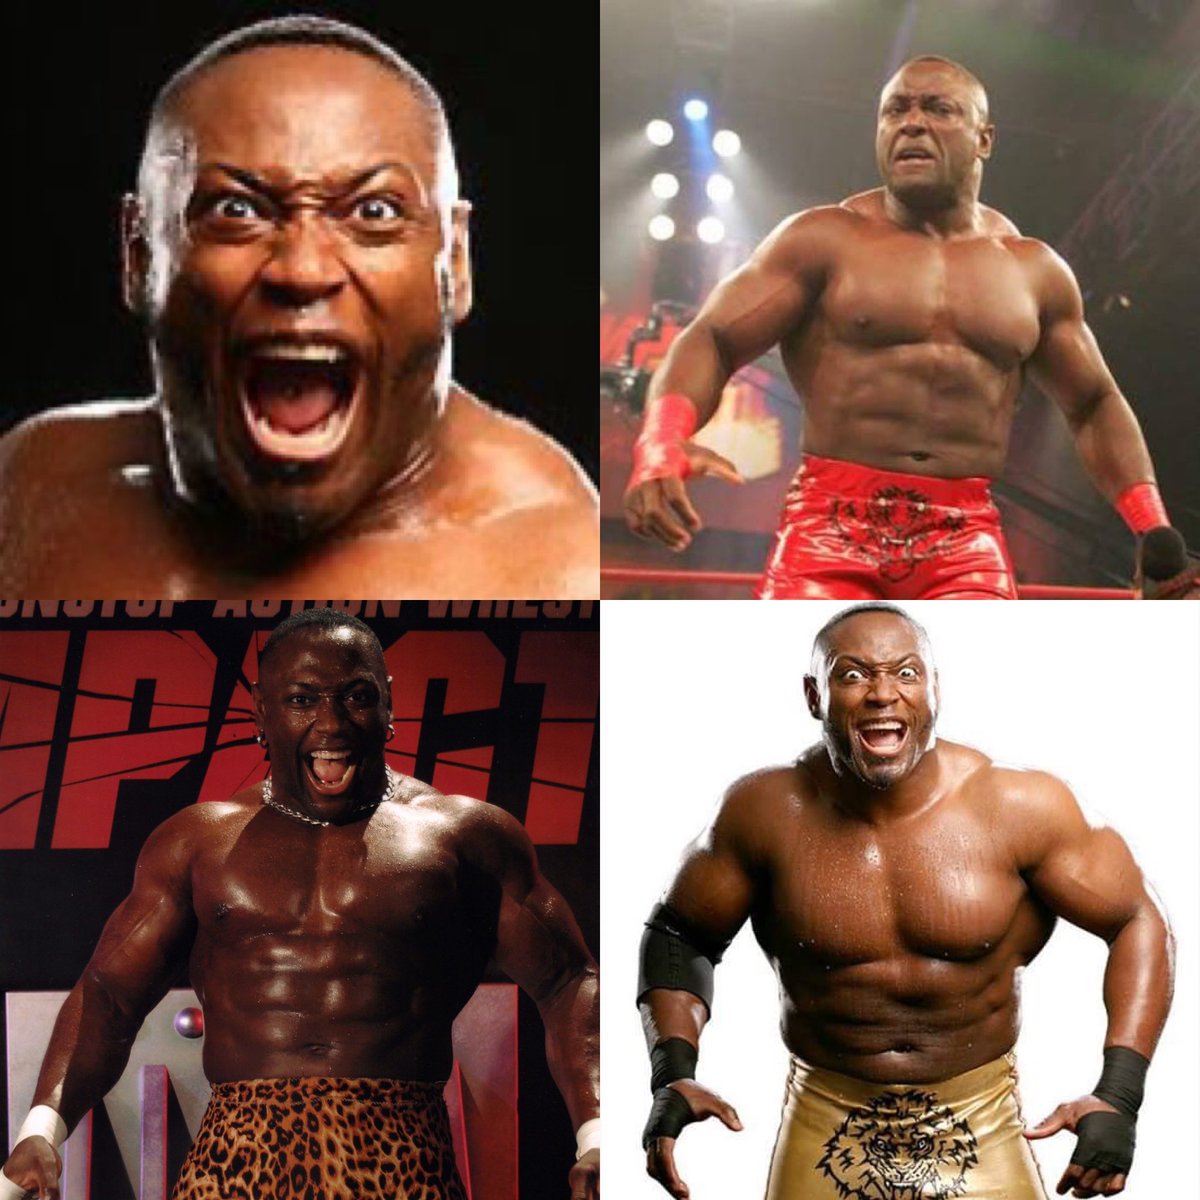 Wrestler of the Week: Montaque N. Brown is an American former professional wrestler and National Football League linebacker. He is perhaps best known for his time with Total Nonstop Action Wrestling #montybrown #tnawrestling #impact #ecw #elitewrestlingaudio